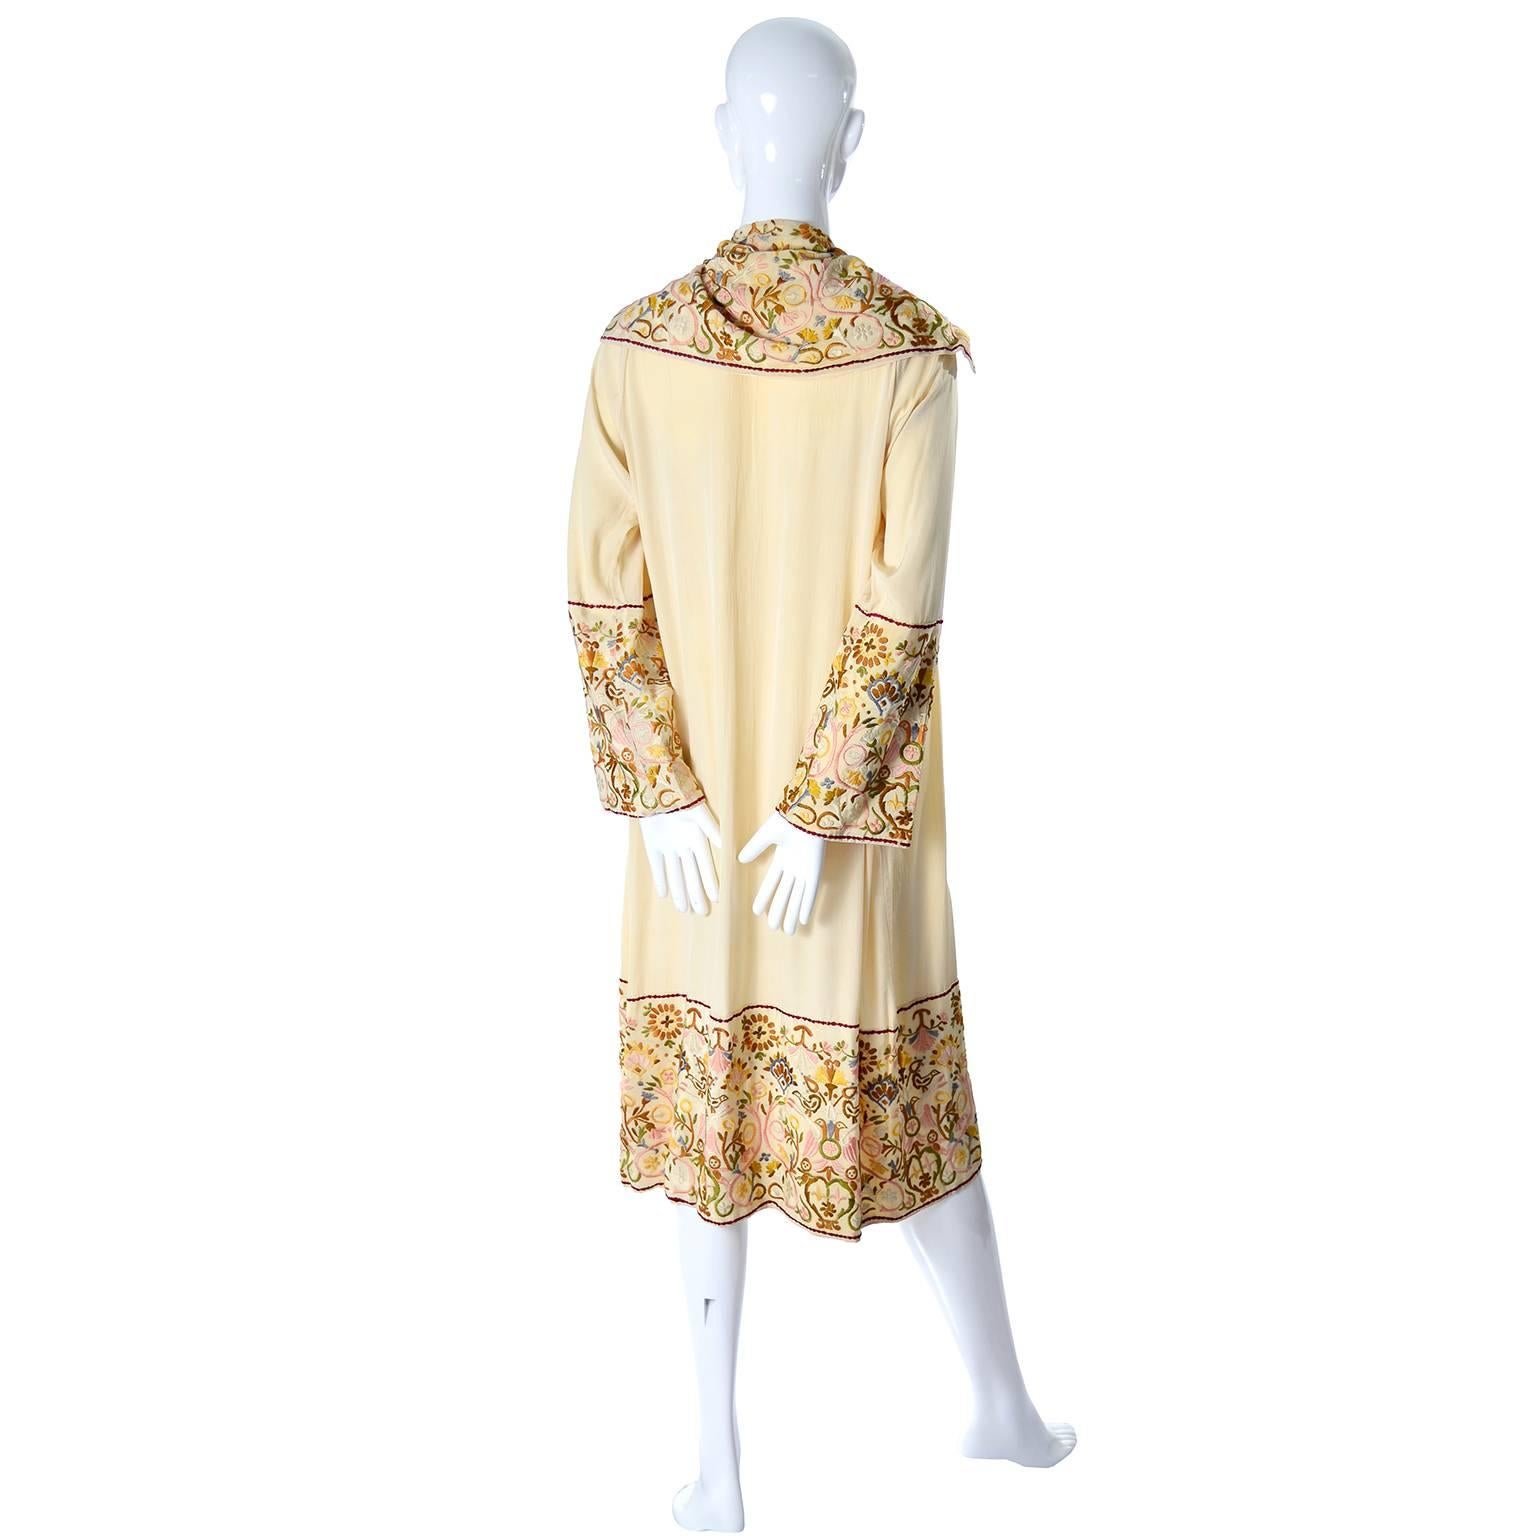 This gorgeous late teens or early 1920's vintage silk robe comes from an estate of antique Asian textiles and clothing I handled a while back.  This has the feel of an art deco kimono without the large sleeves and you could wear it as an evening